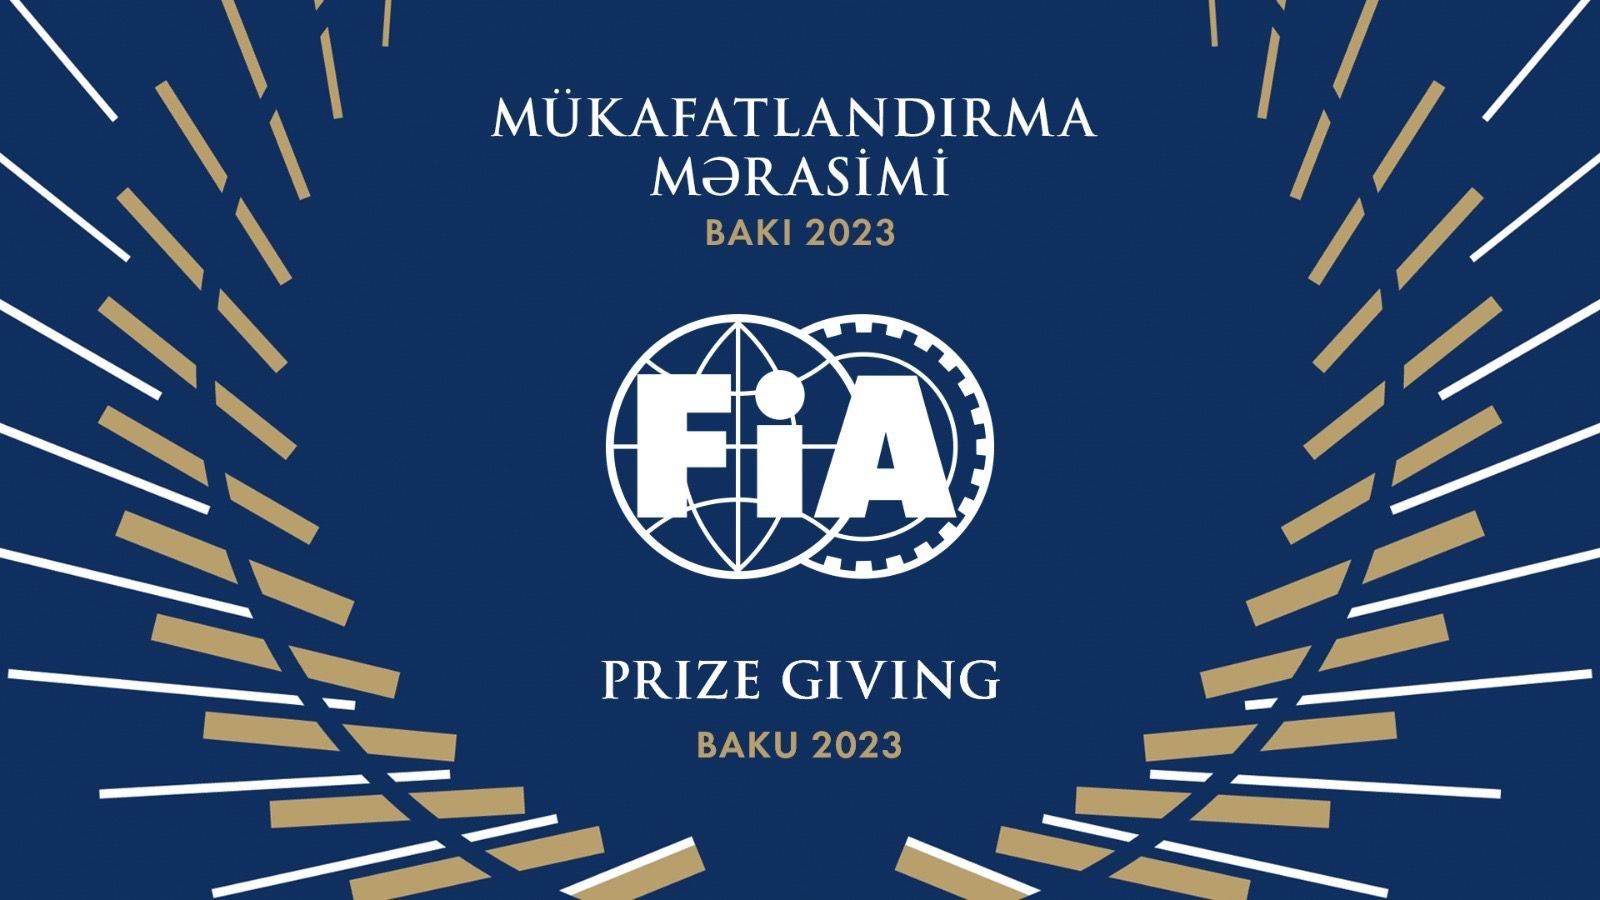 FIA winning drivers to arrive in Baku for 2023 Prize Giving Ceremony